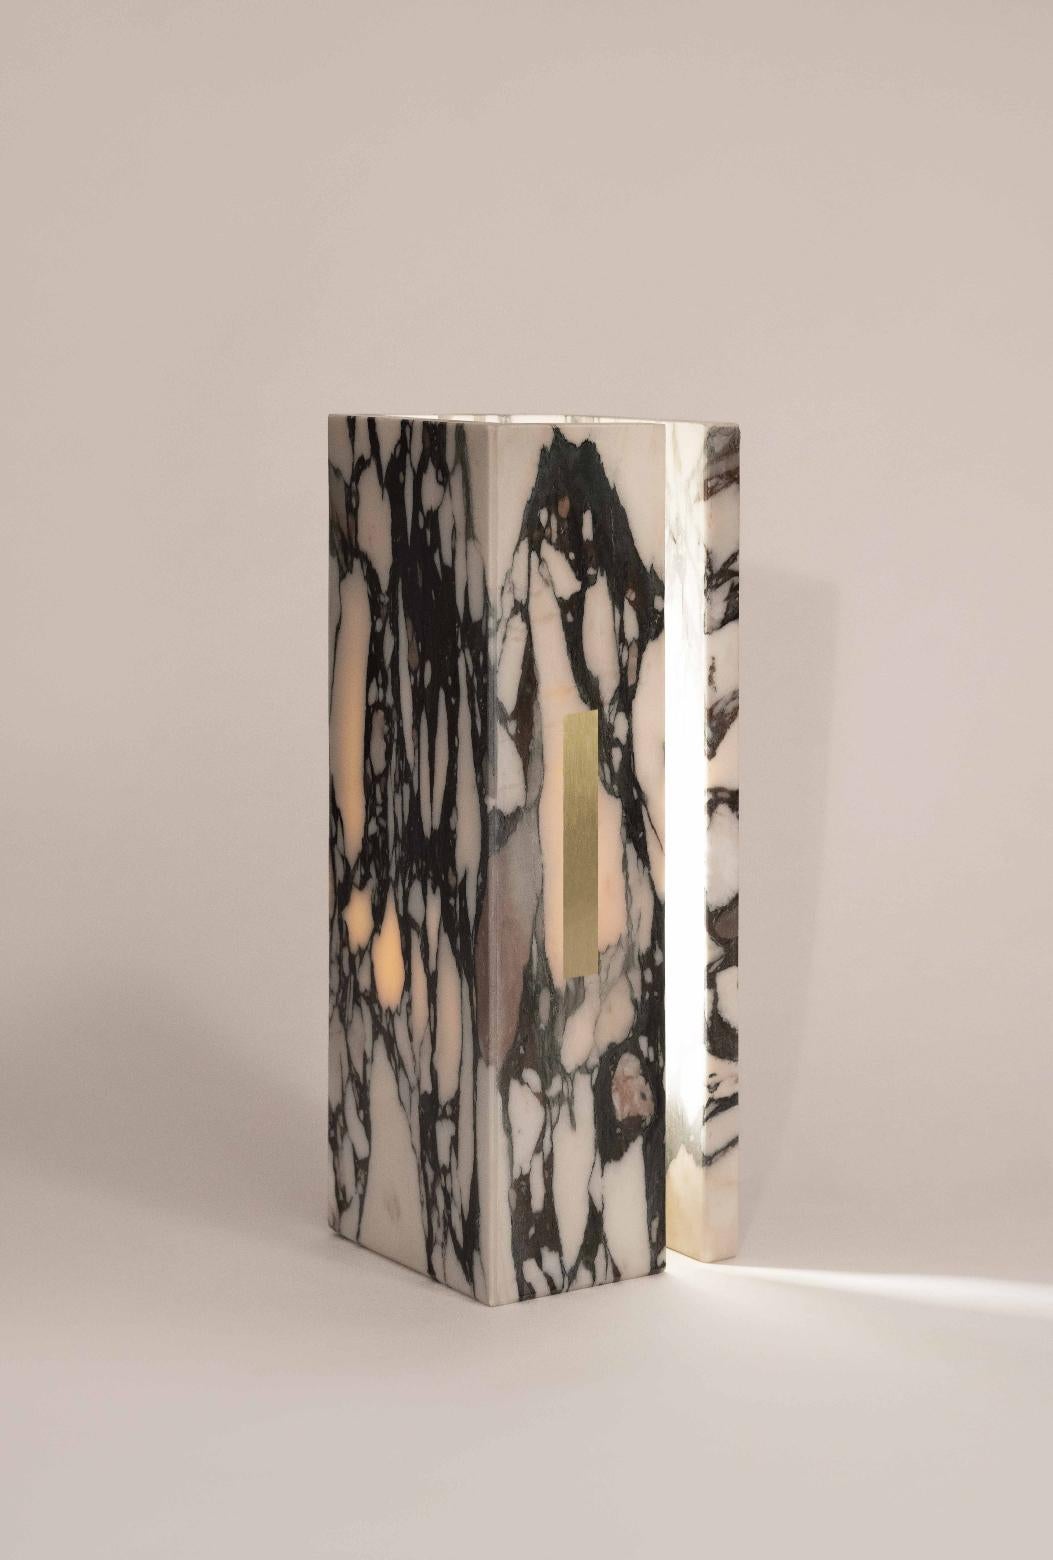 03C calcatta viola marble lamp by Marie Jeunet
Dimensions: H 40 x L 14.5 cm
Materials: Calcatta viola marble

A tribute collection to the exceptional stones that nature offers us, such as onyx or marble. Precious, semi-translucent materials with